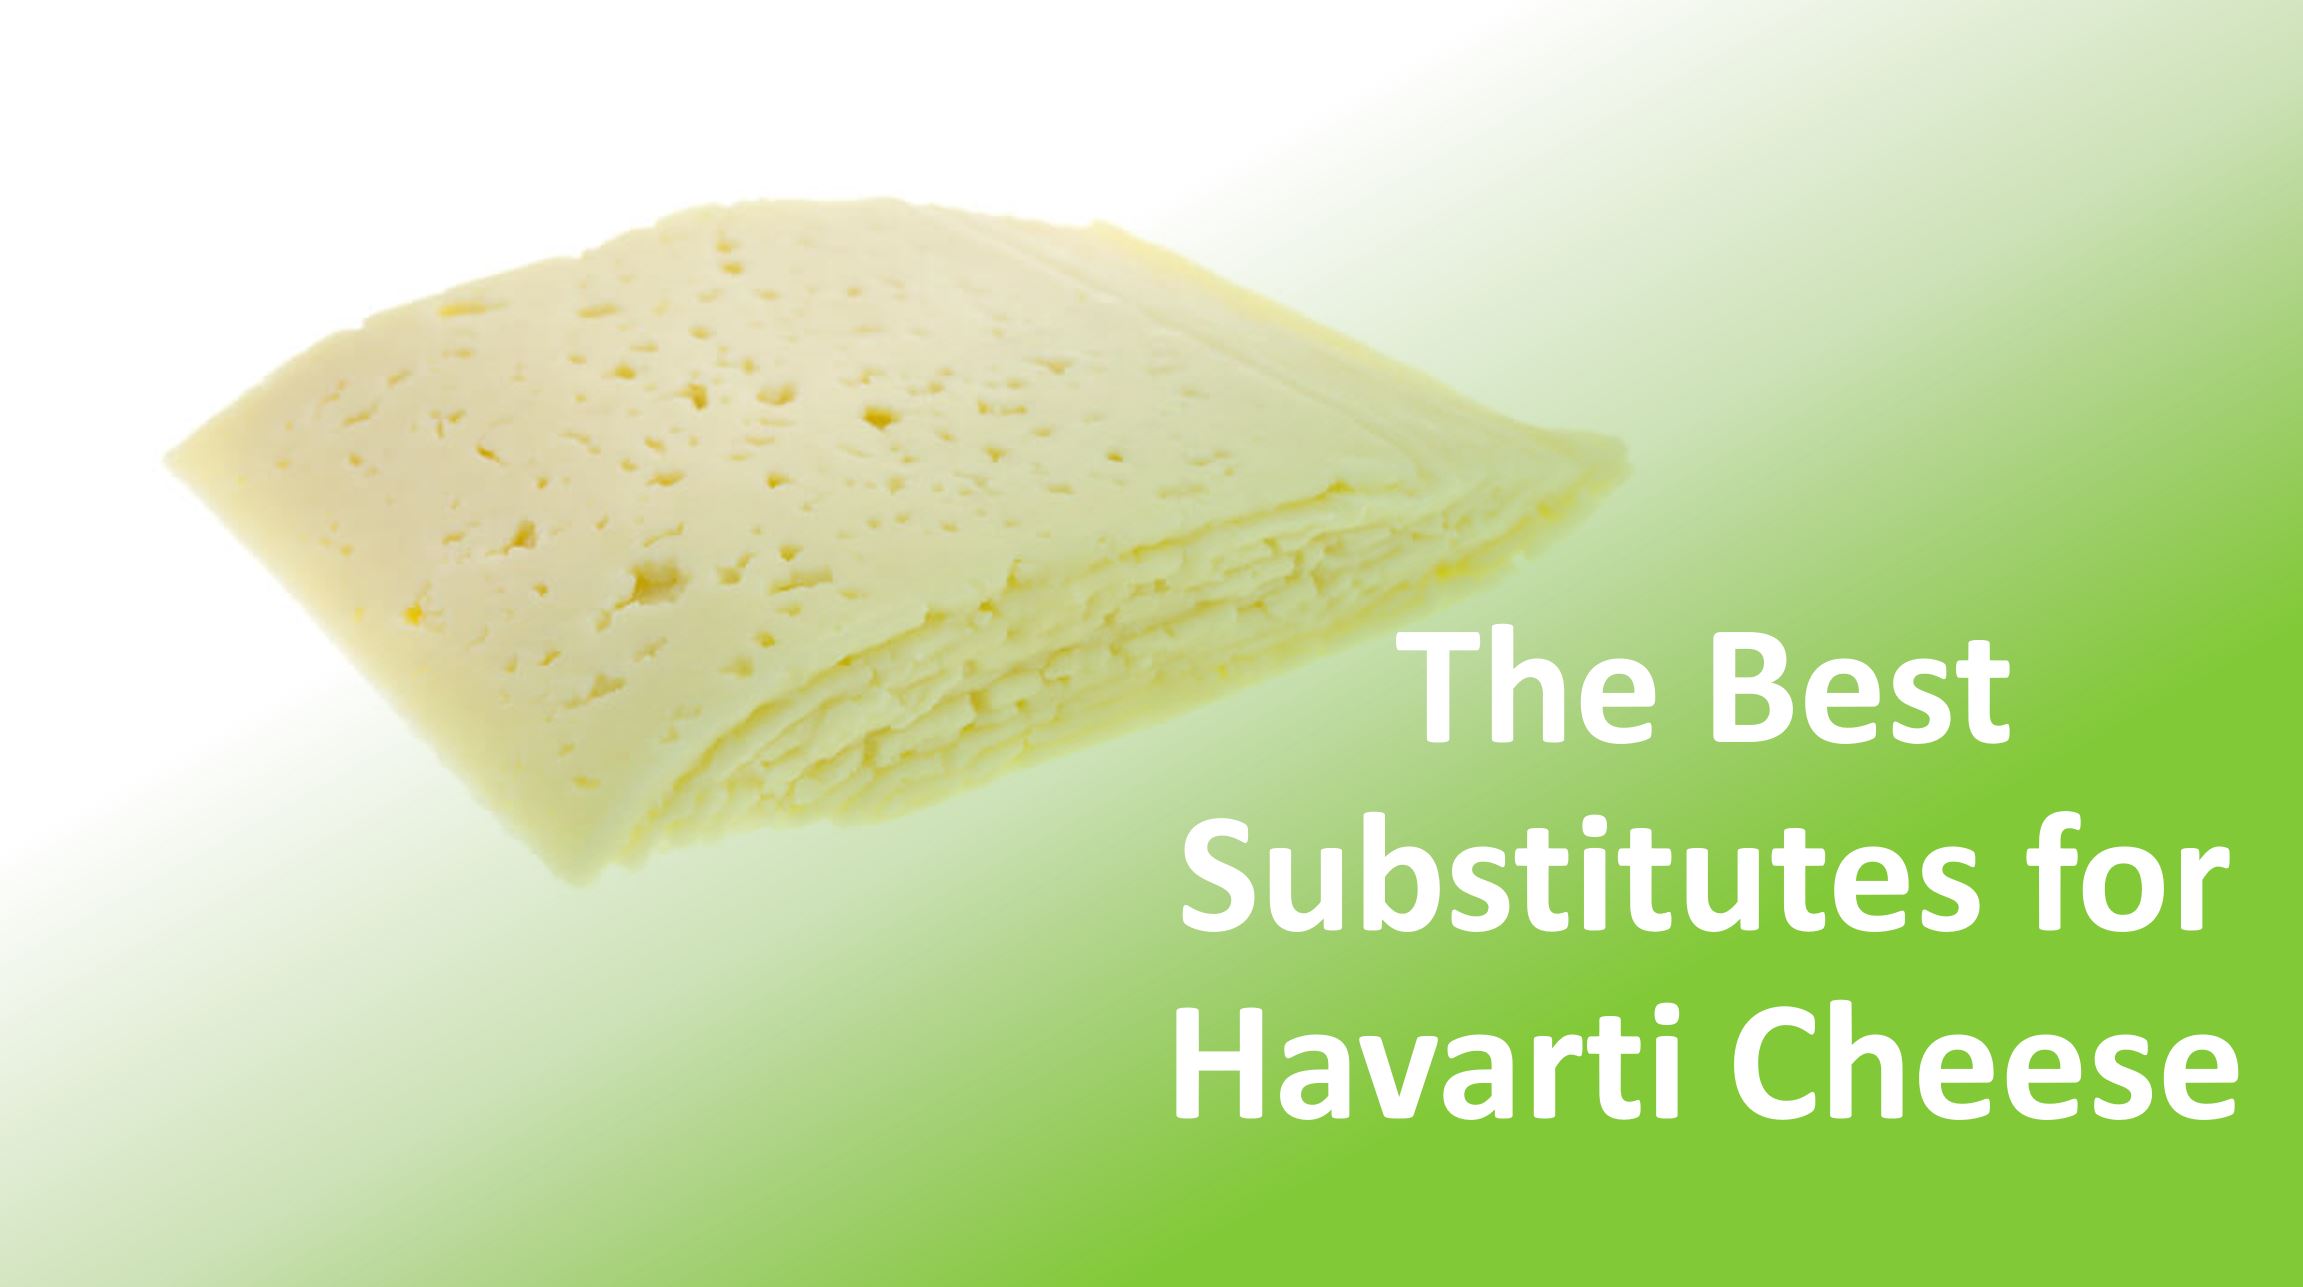 Havarti Cheese Substitutes: Here's What To Get Instead